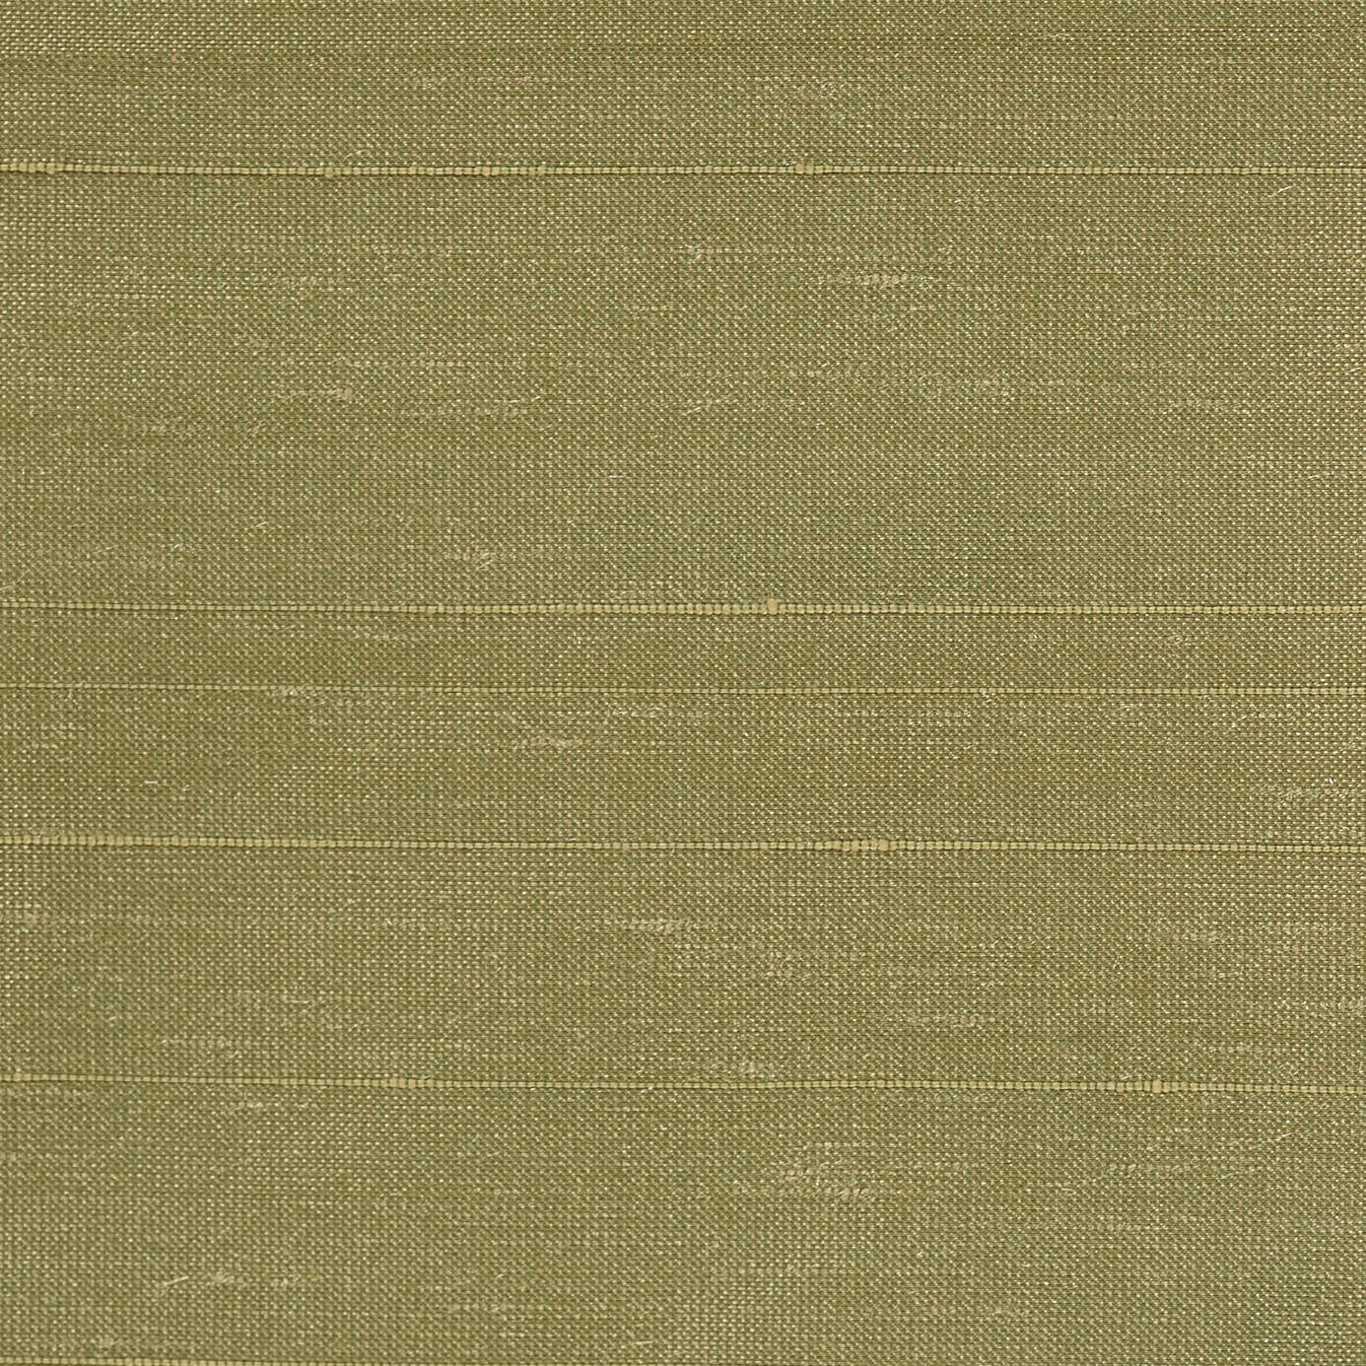 Deflect Fabric by Harlequin - HPOL440436 - Fennel